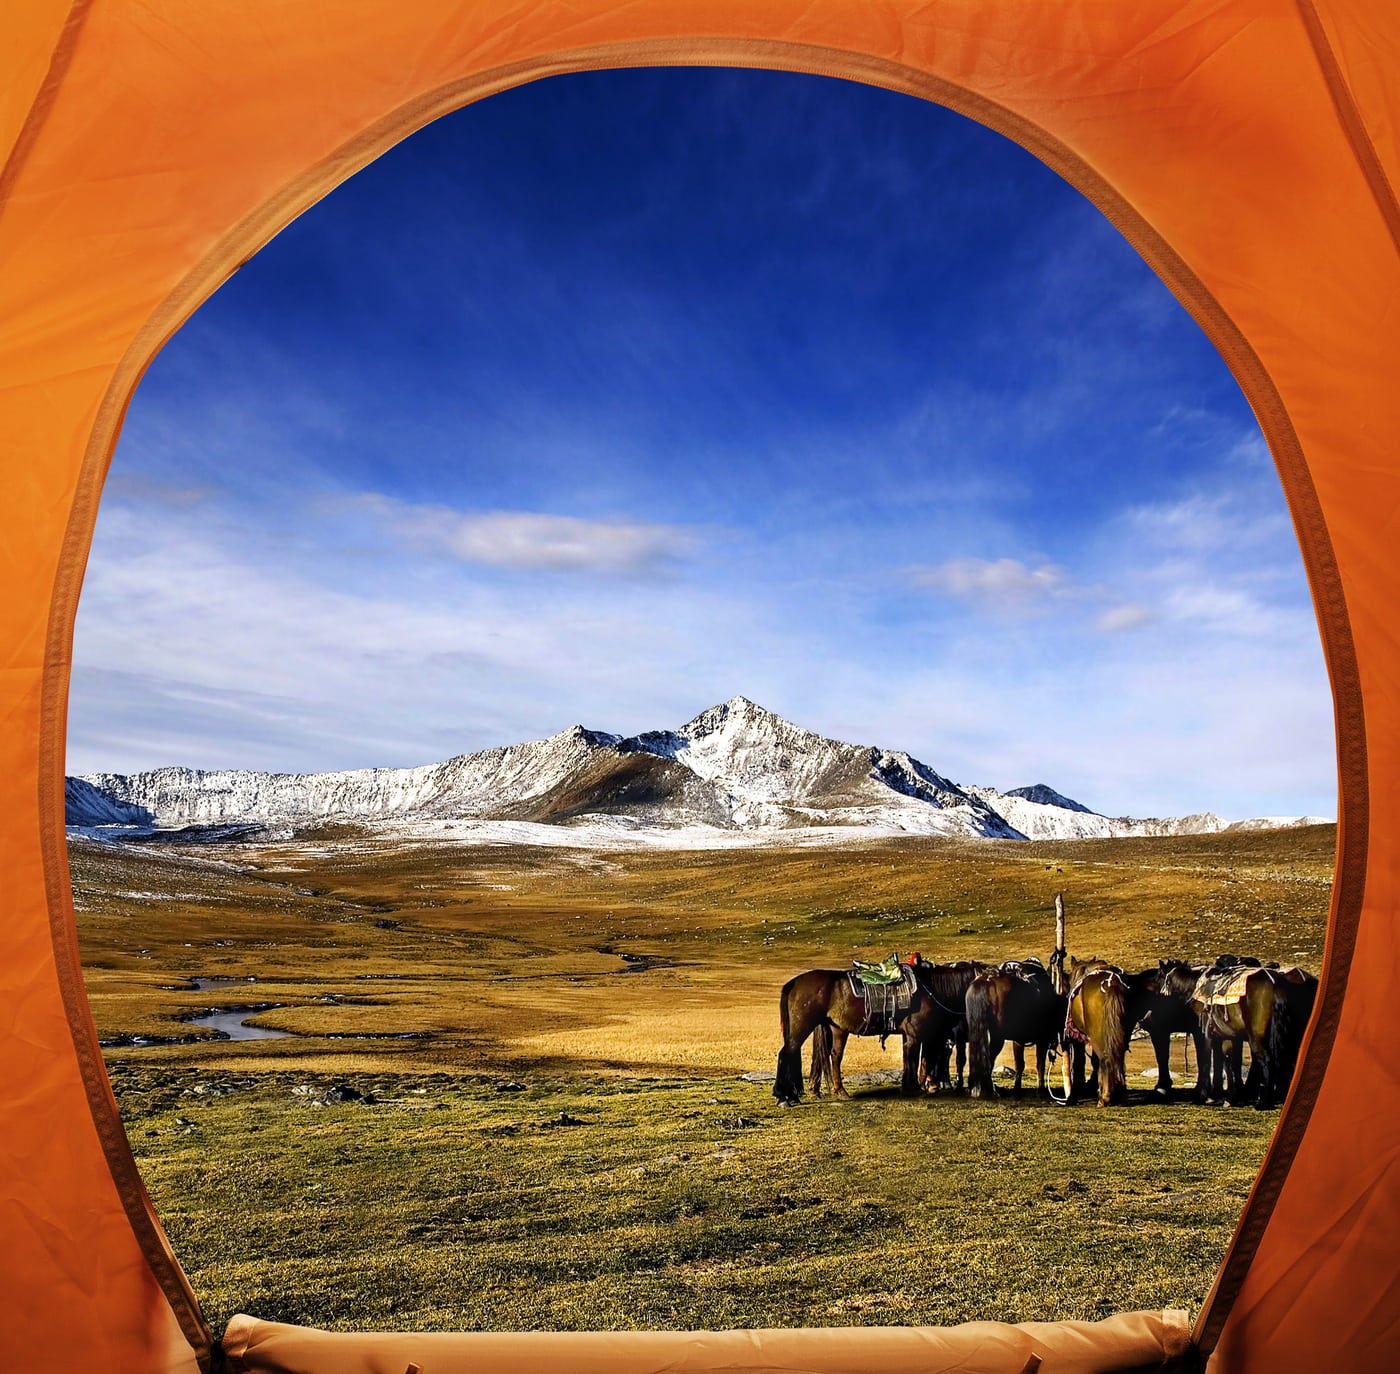 View from inside orange tent, facing into an alpine field full of grazing horses.